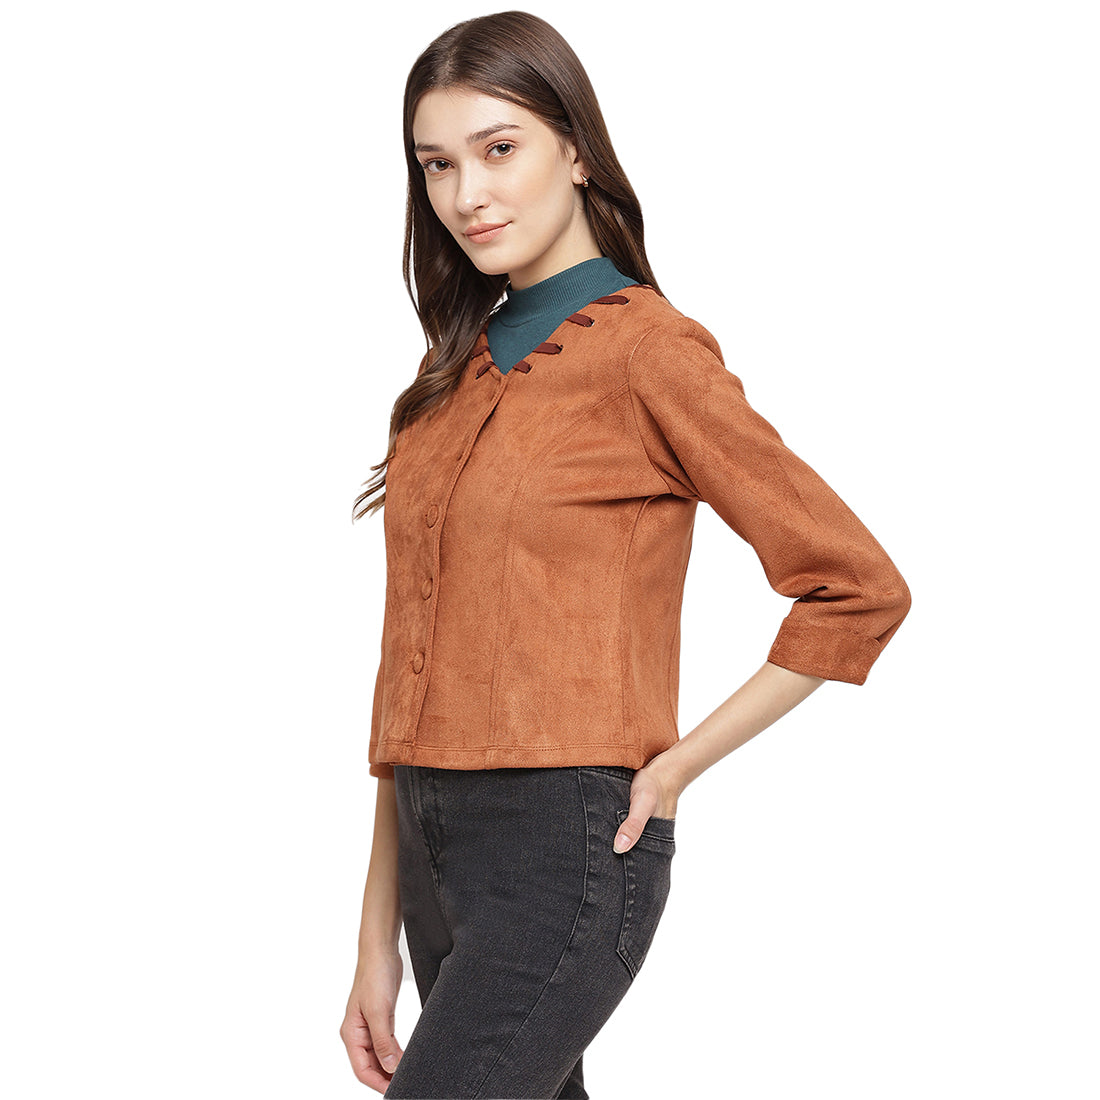 Tan 3/4 Sleeve Solid Top Knit Top For Women & Girls